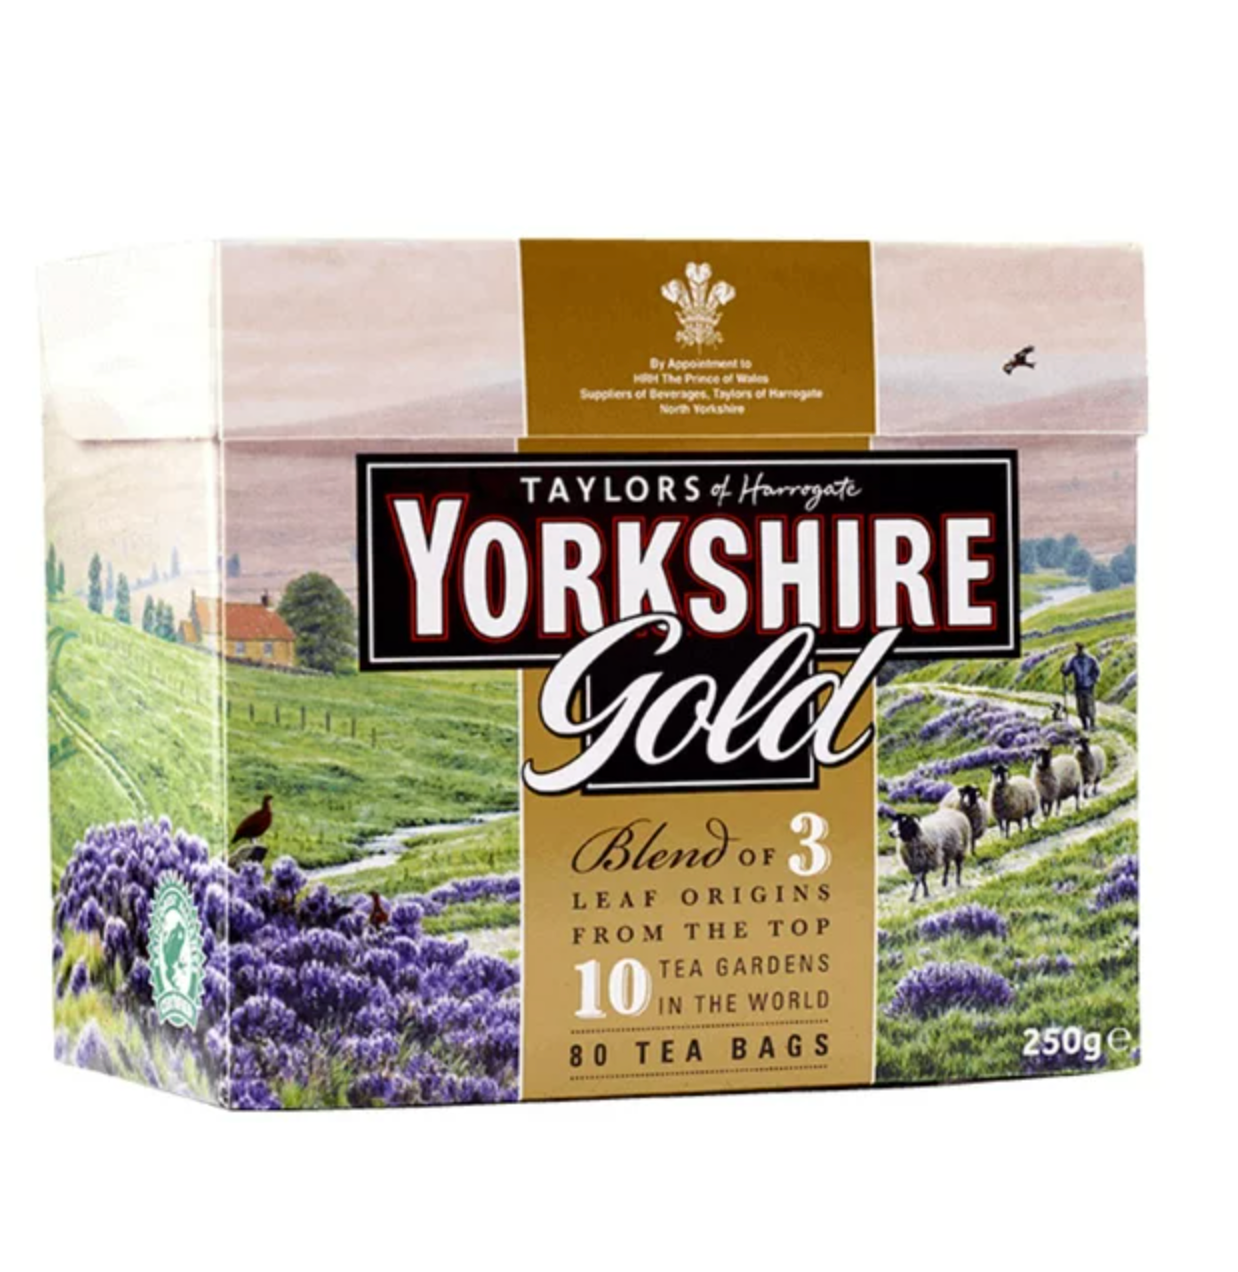 Yorkshire Gold 80 teabags